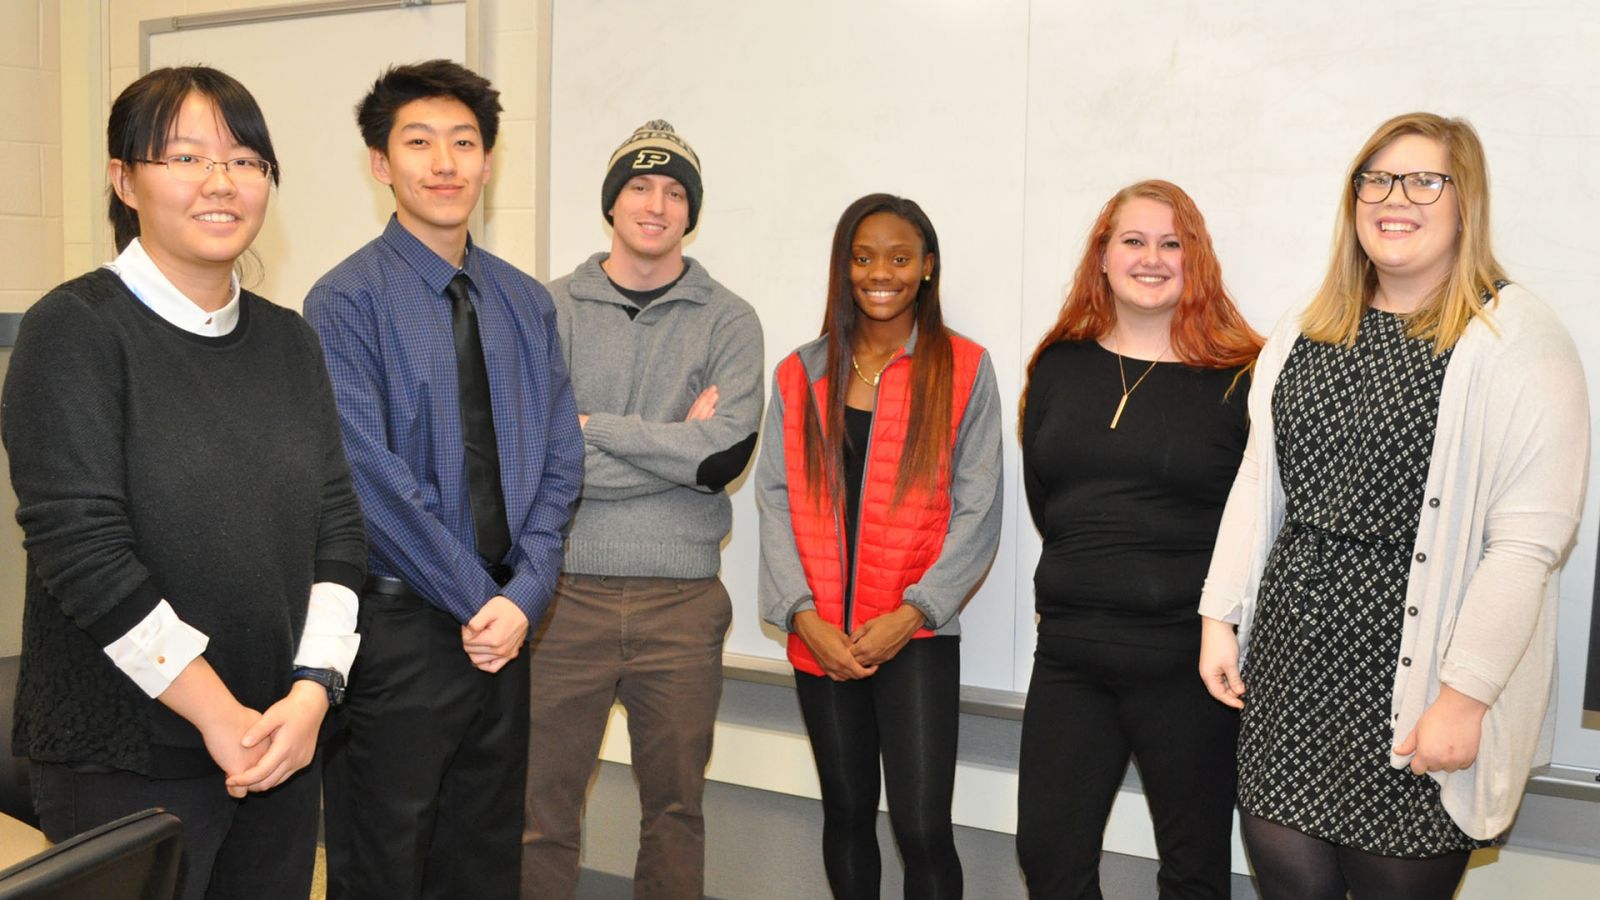 The team comprised of Yubing Han, Kevin Chen, Logan Leiter, Sekayi Bracey, Marisa McMindes and Sarah Richards created a music video they hope inspires girls to have an interest in STEM careers.